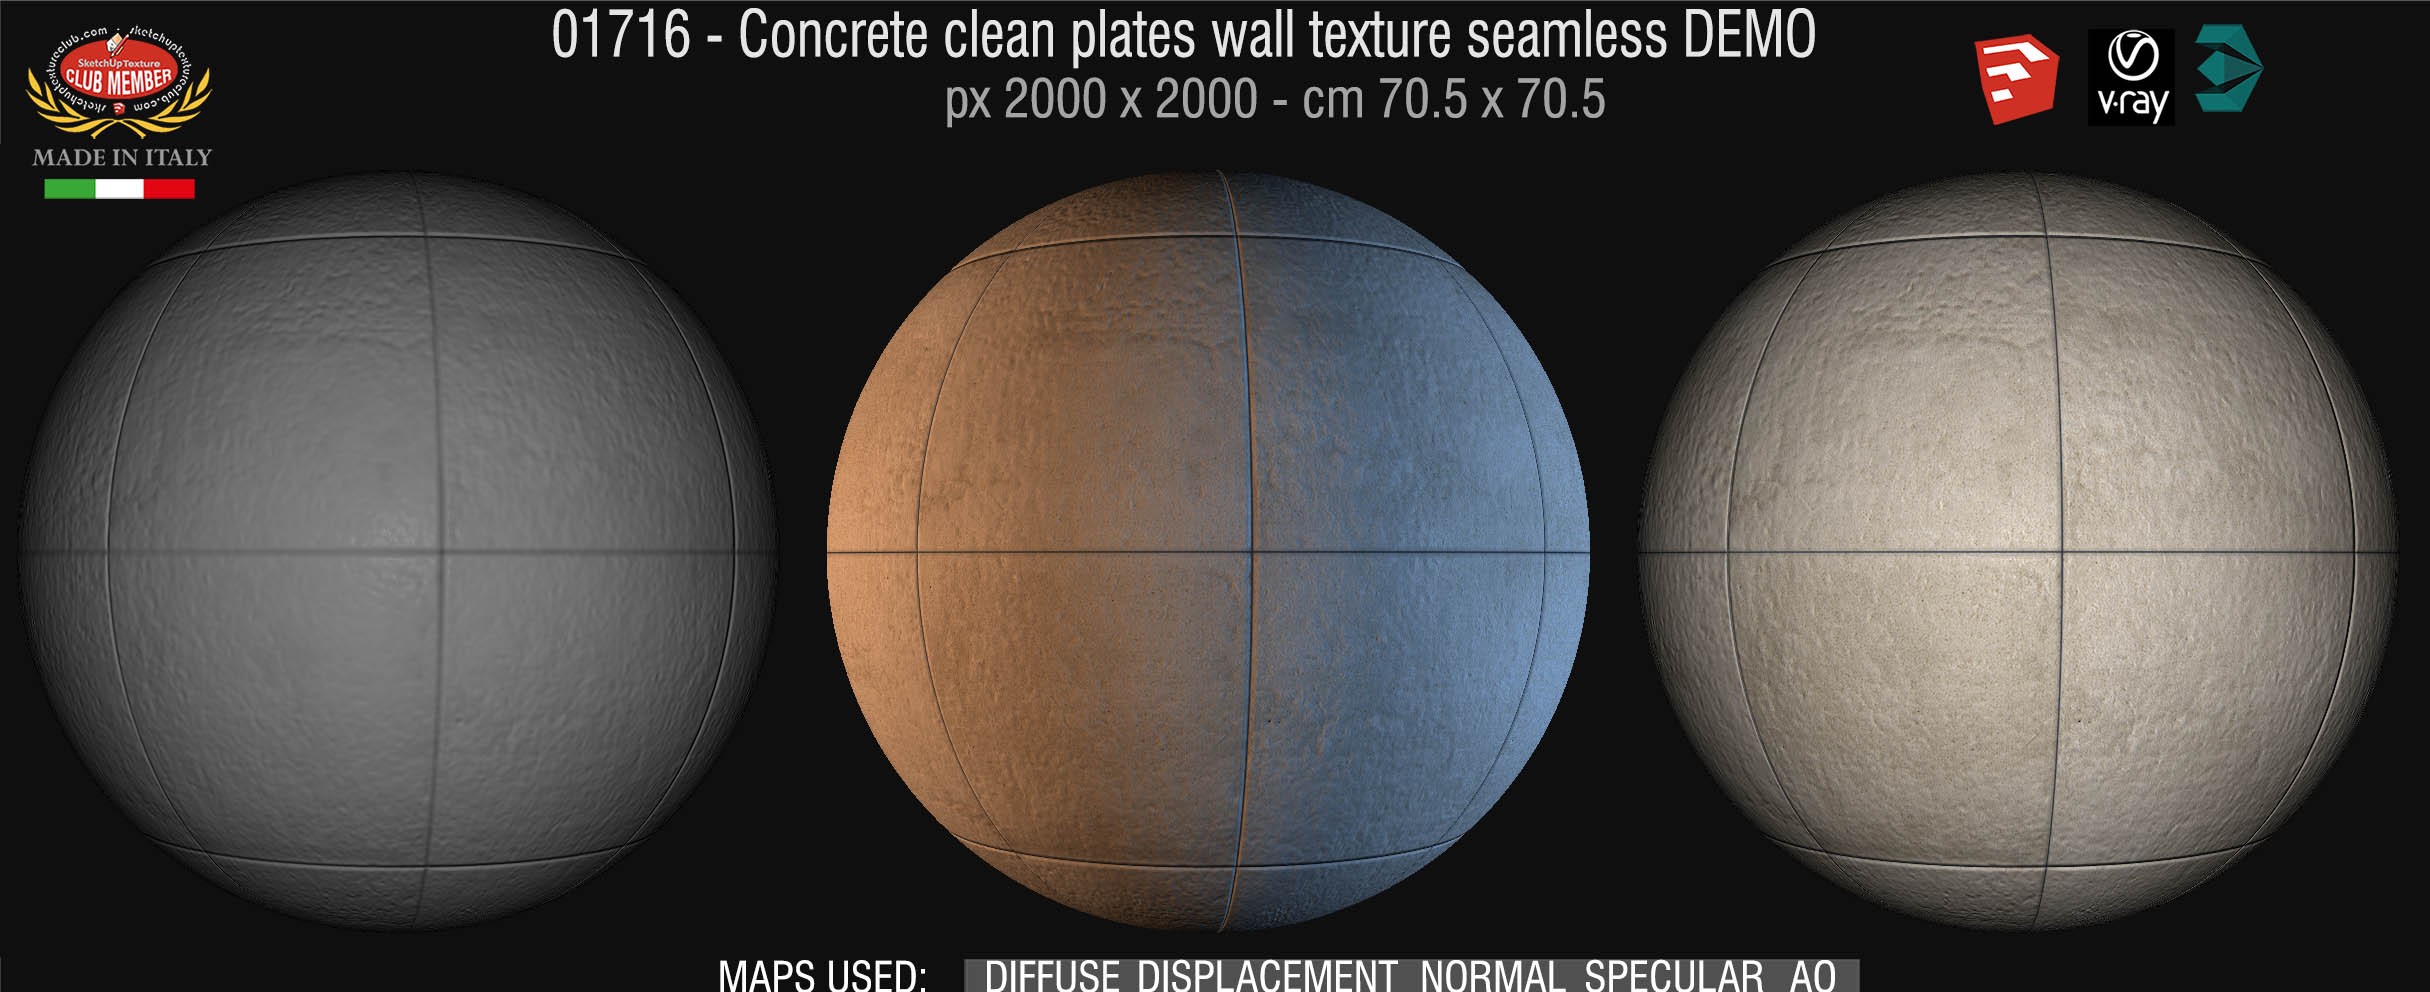 01716 Concrete clean plates wall texture seamless + maps DEMO